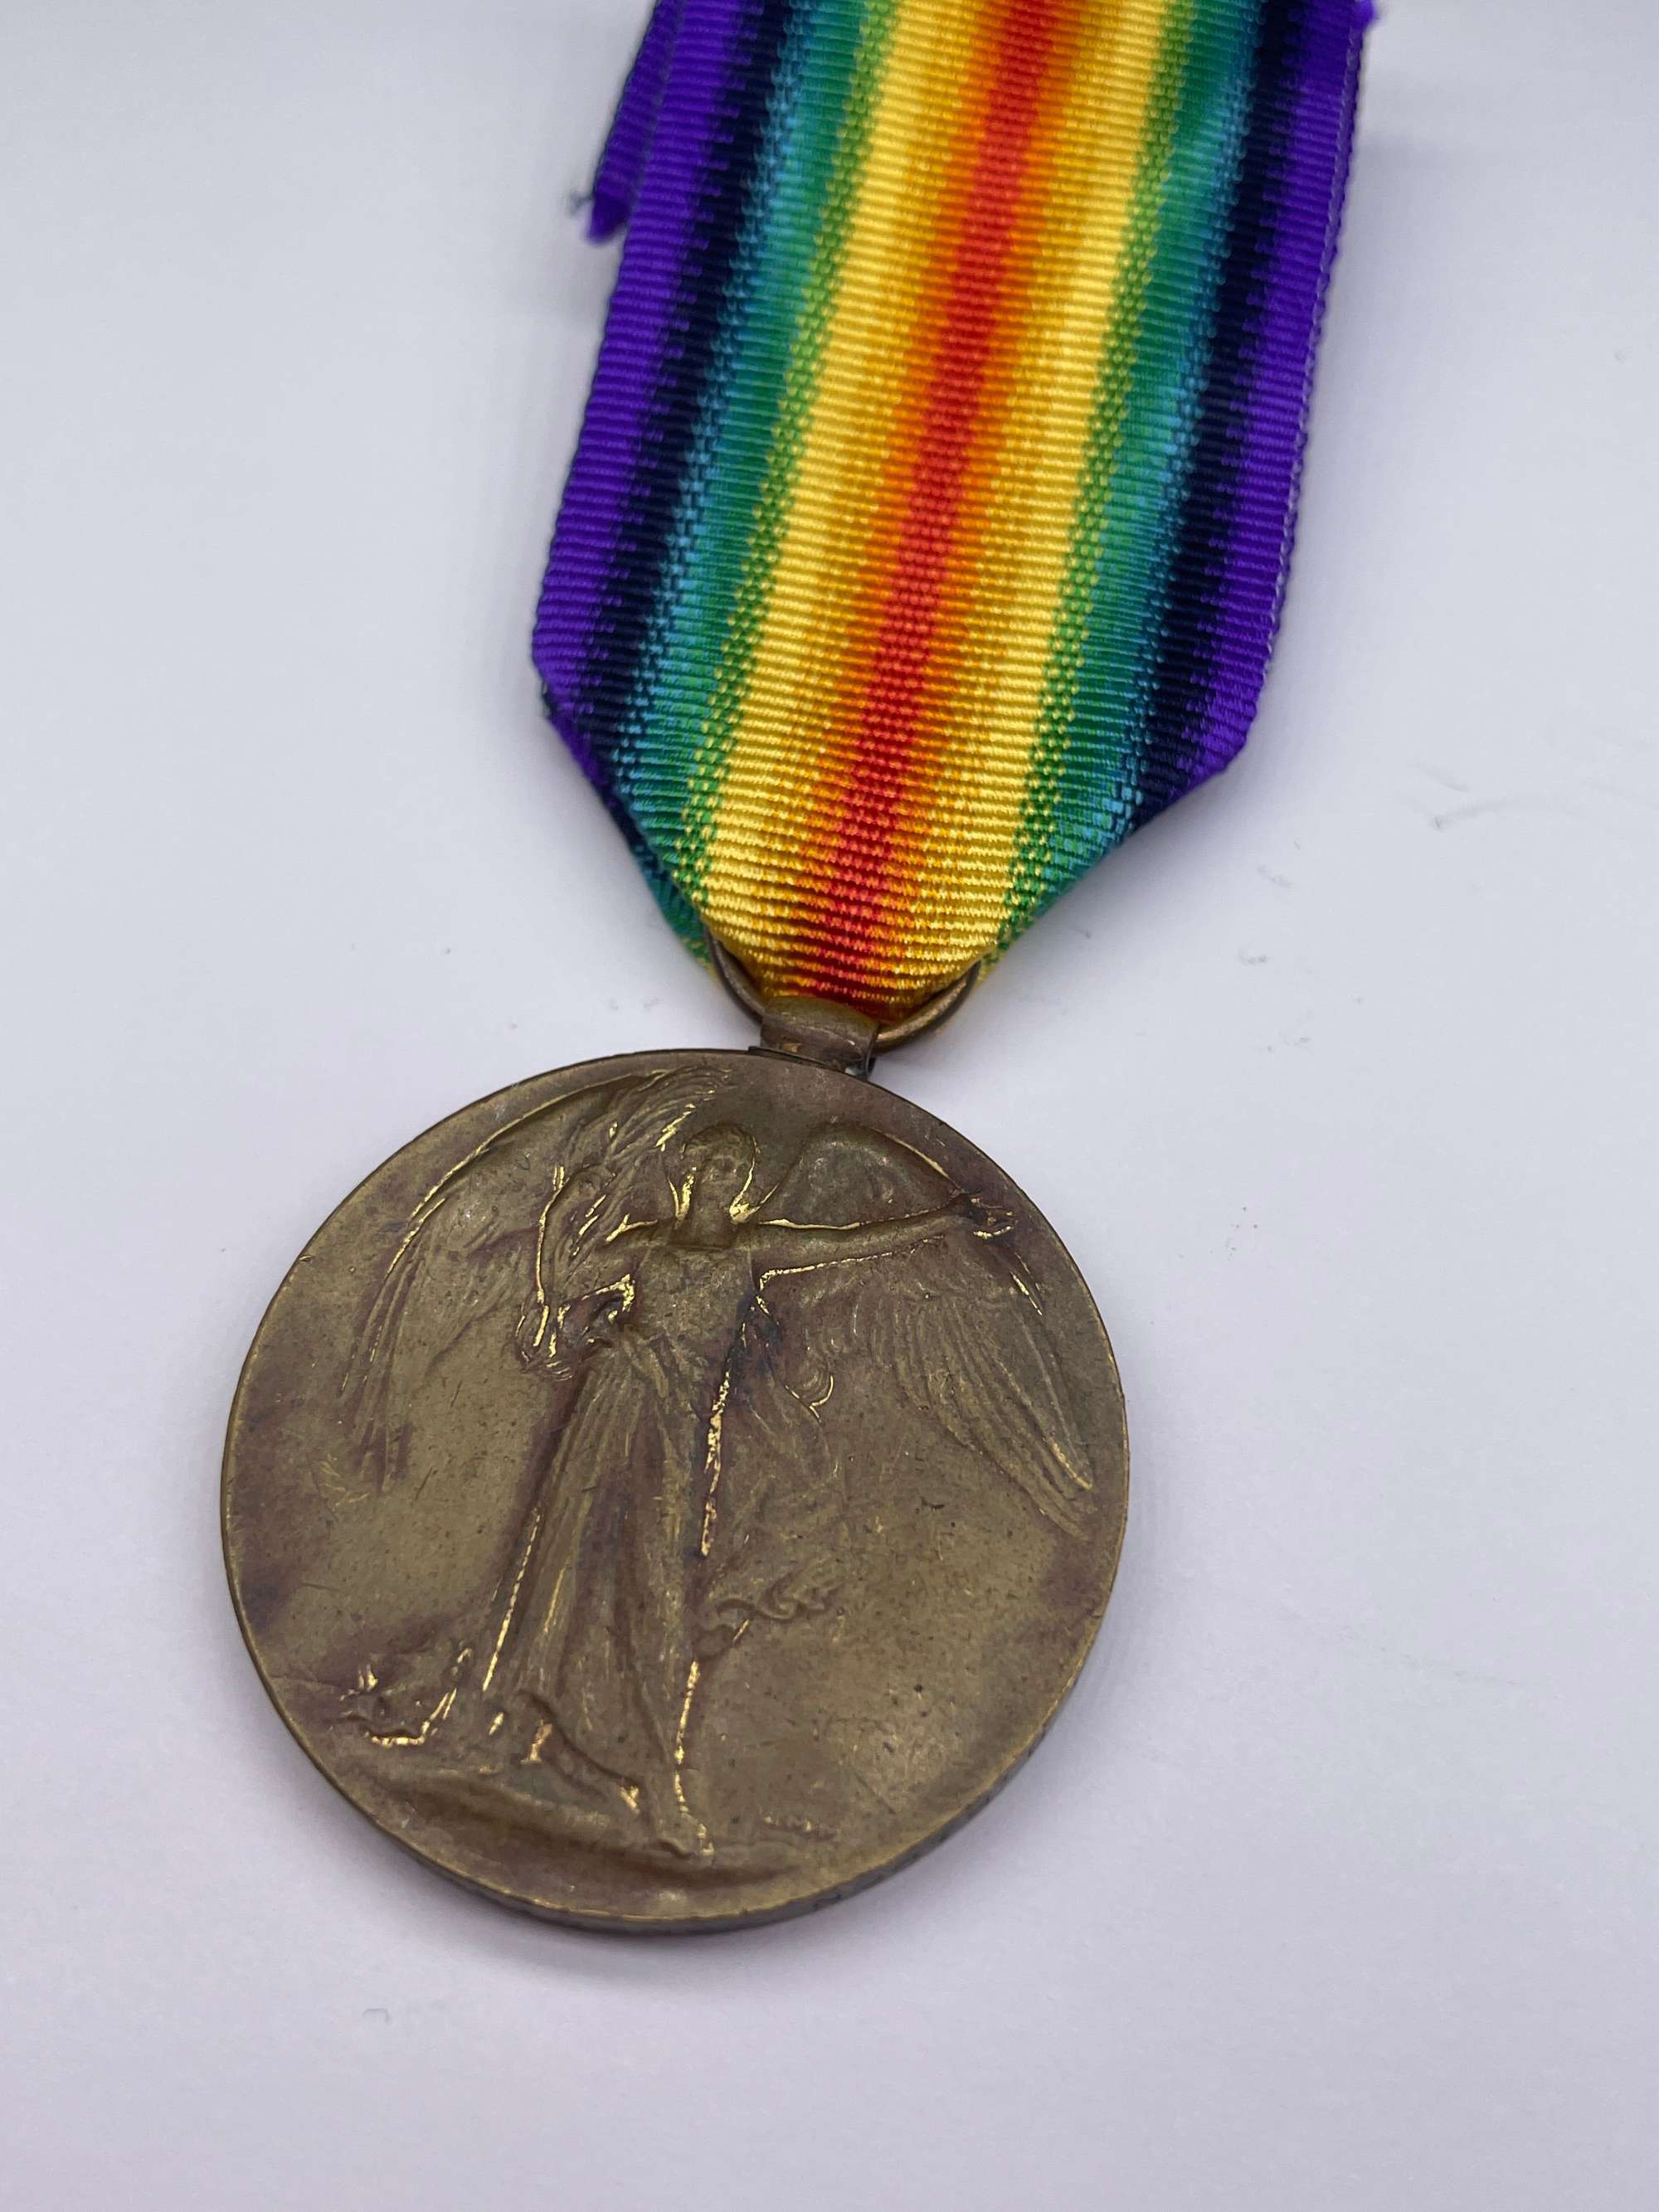 Original World War One Victory Medal, Pte Armstrong, Northumberland Fusiliers, Killed in A